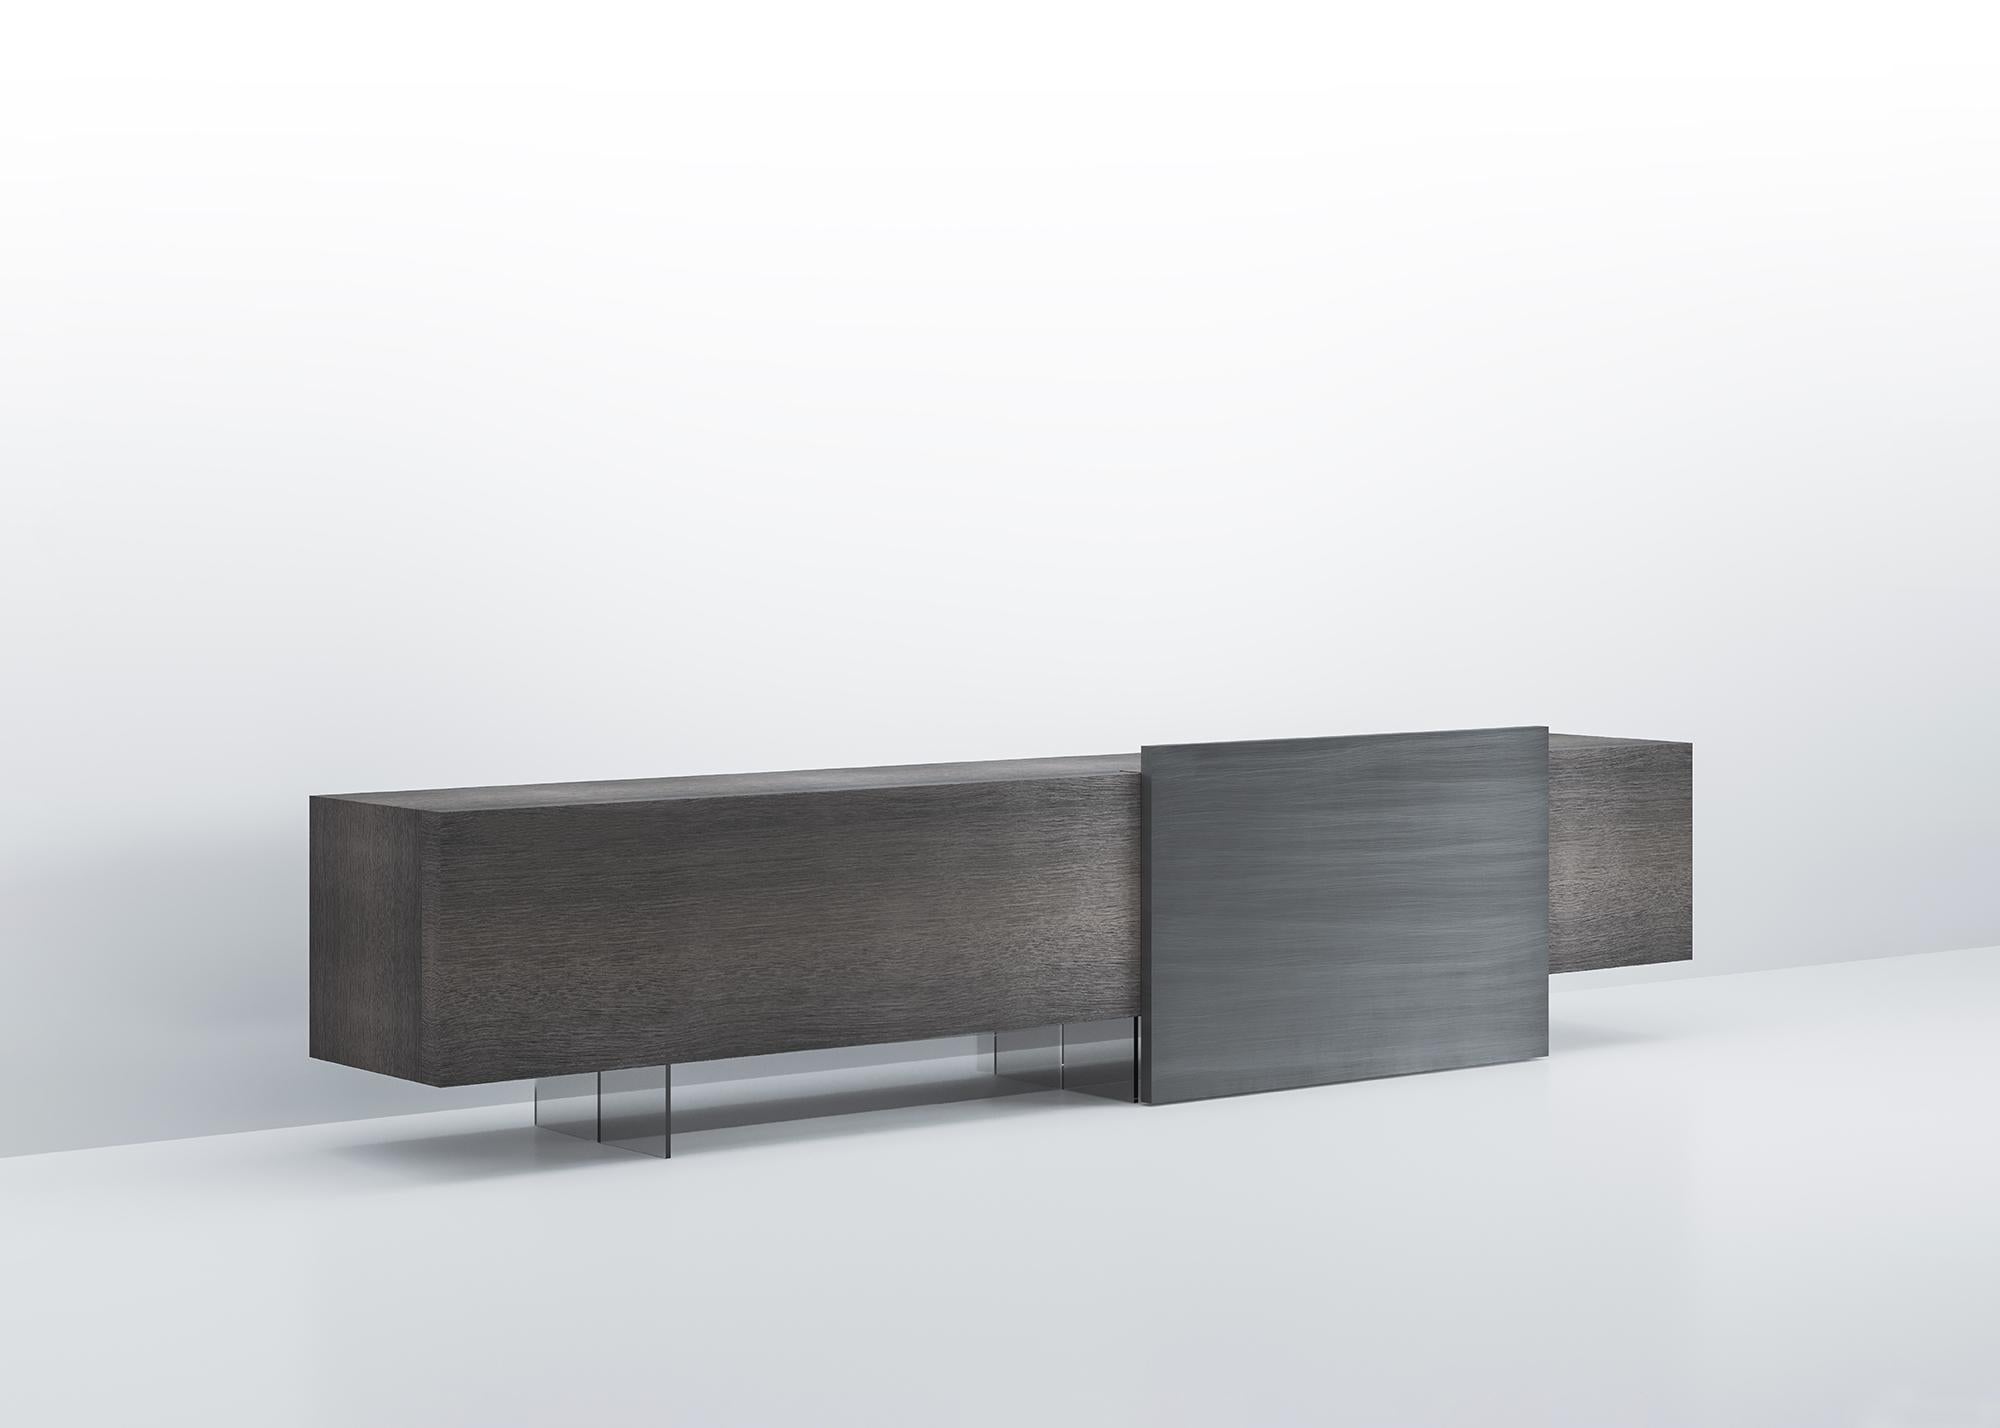 Low sideboard in two lengths, 246 or 290 cm. The suspension effect created by the transparent methacrylate base is emphasized by an LED back-lighting strip along the entire length of the cabinet. Dimmable LED lighting with switch that can also be